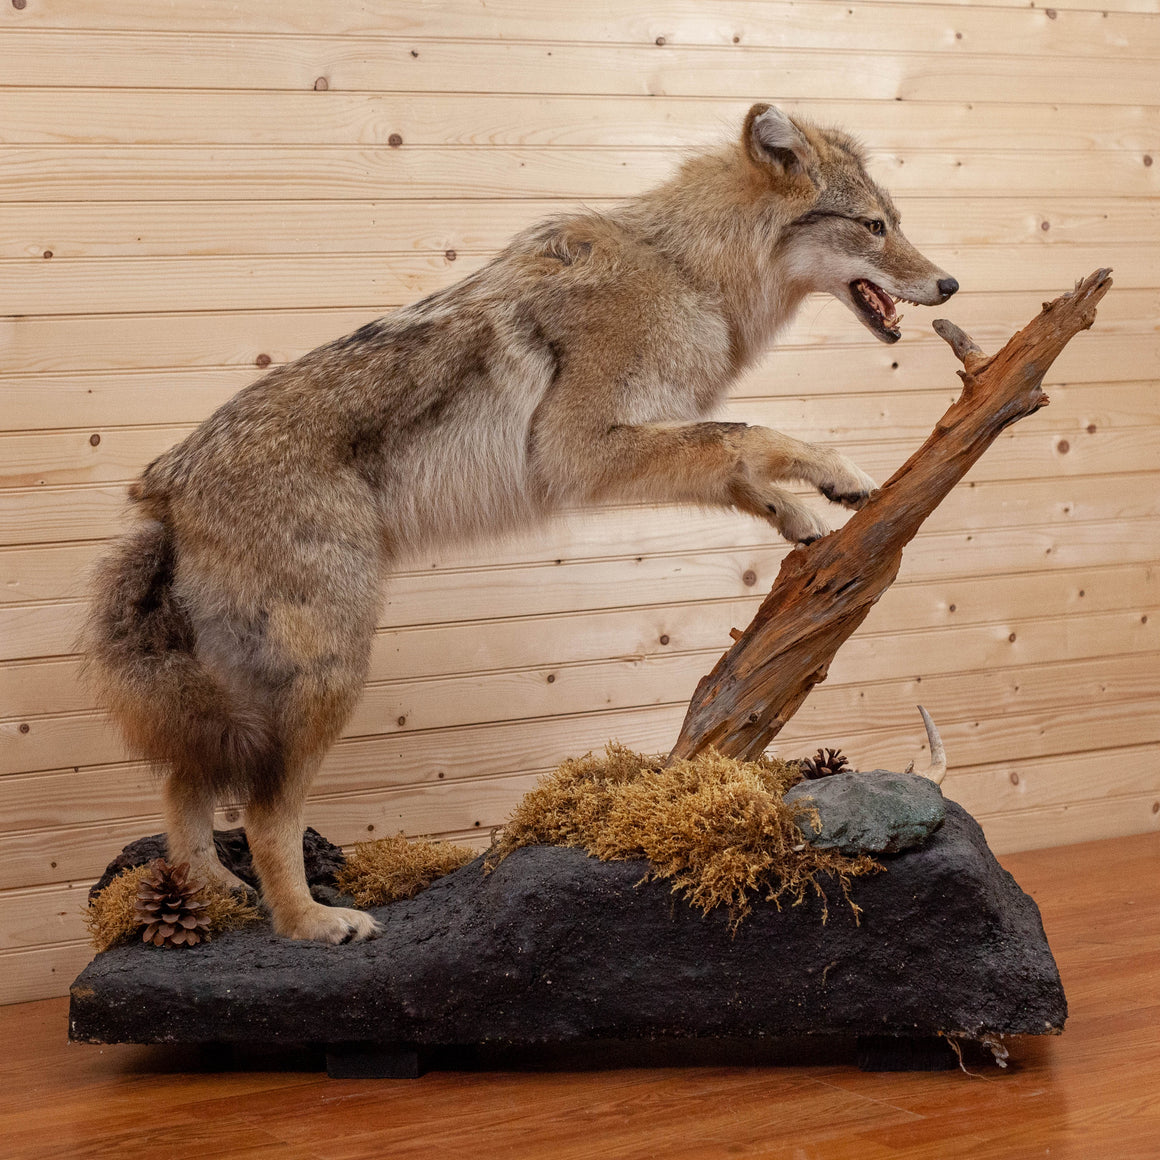 Howling Coyote taxidermy mount for sale SKU 2091 - All Taxidermy